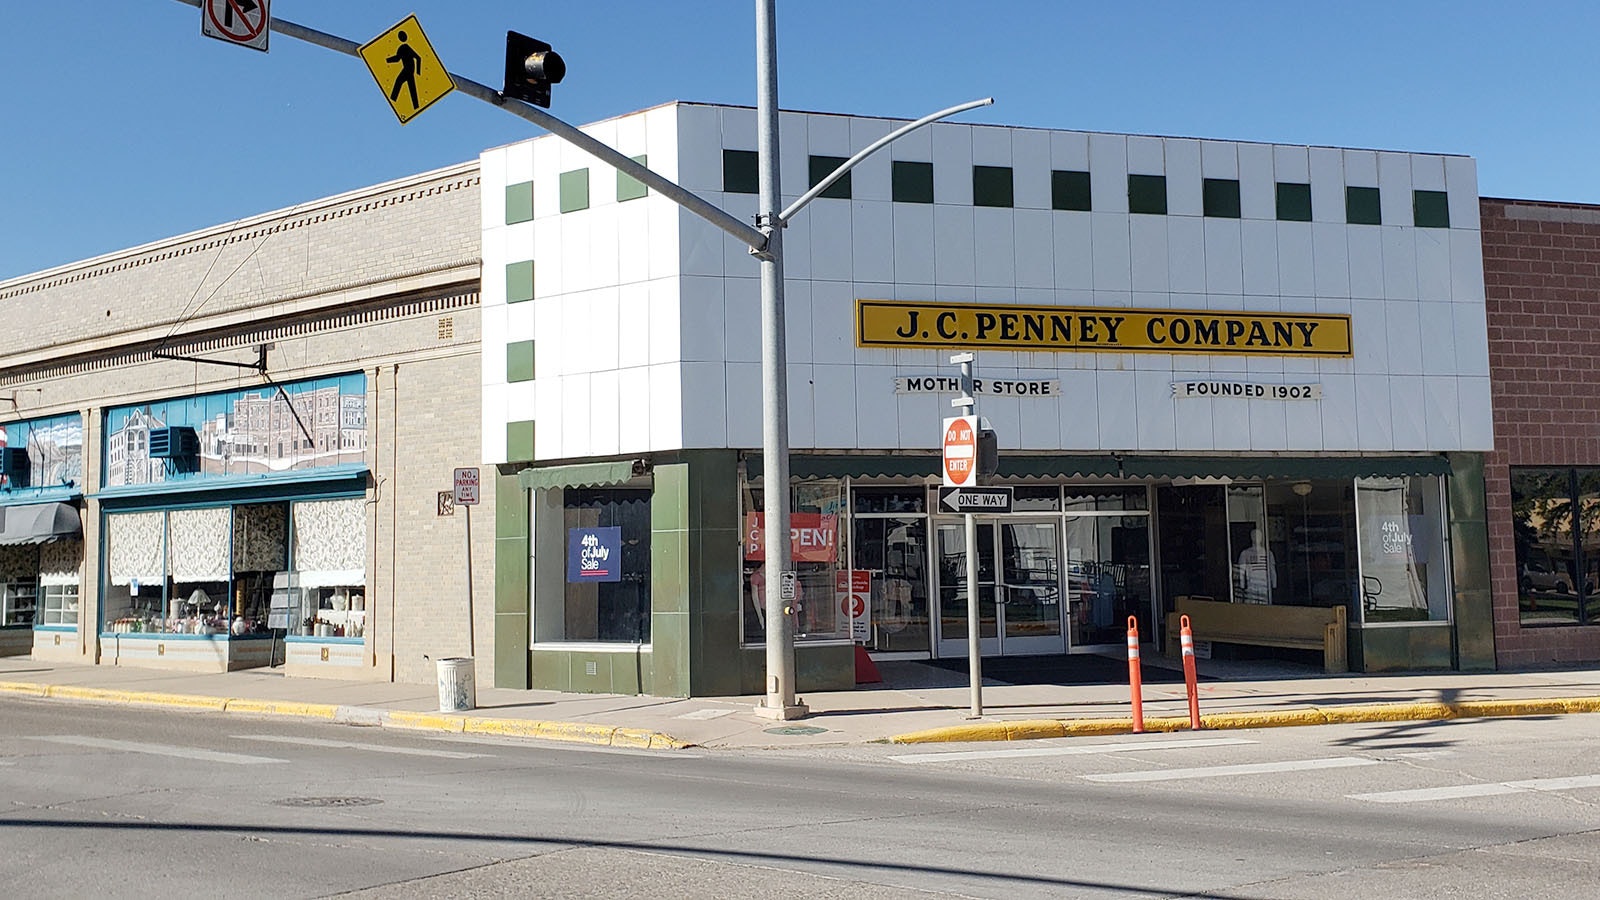 The first JCPenny store, the company's "mother store," in Kemmerer, Wyoming.